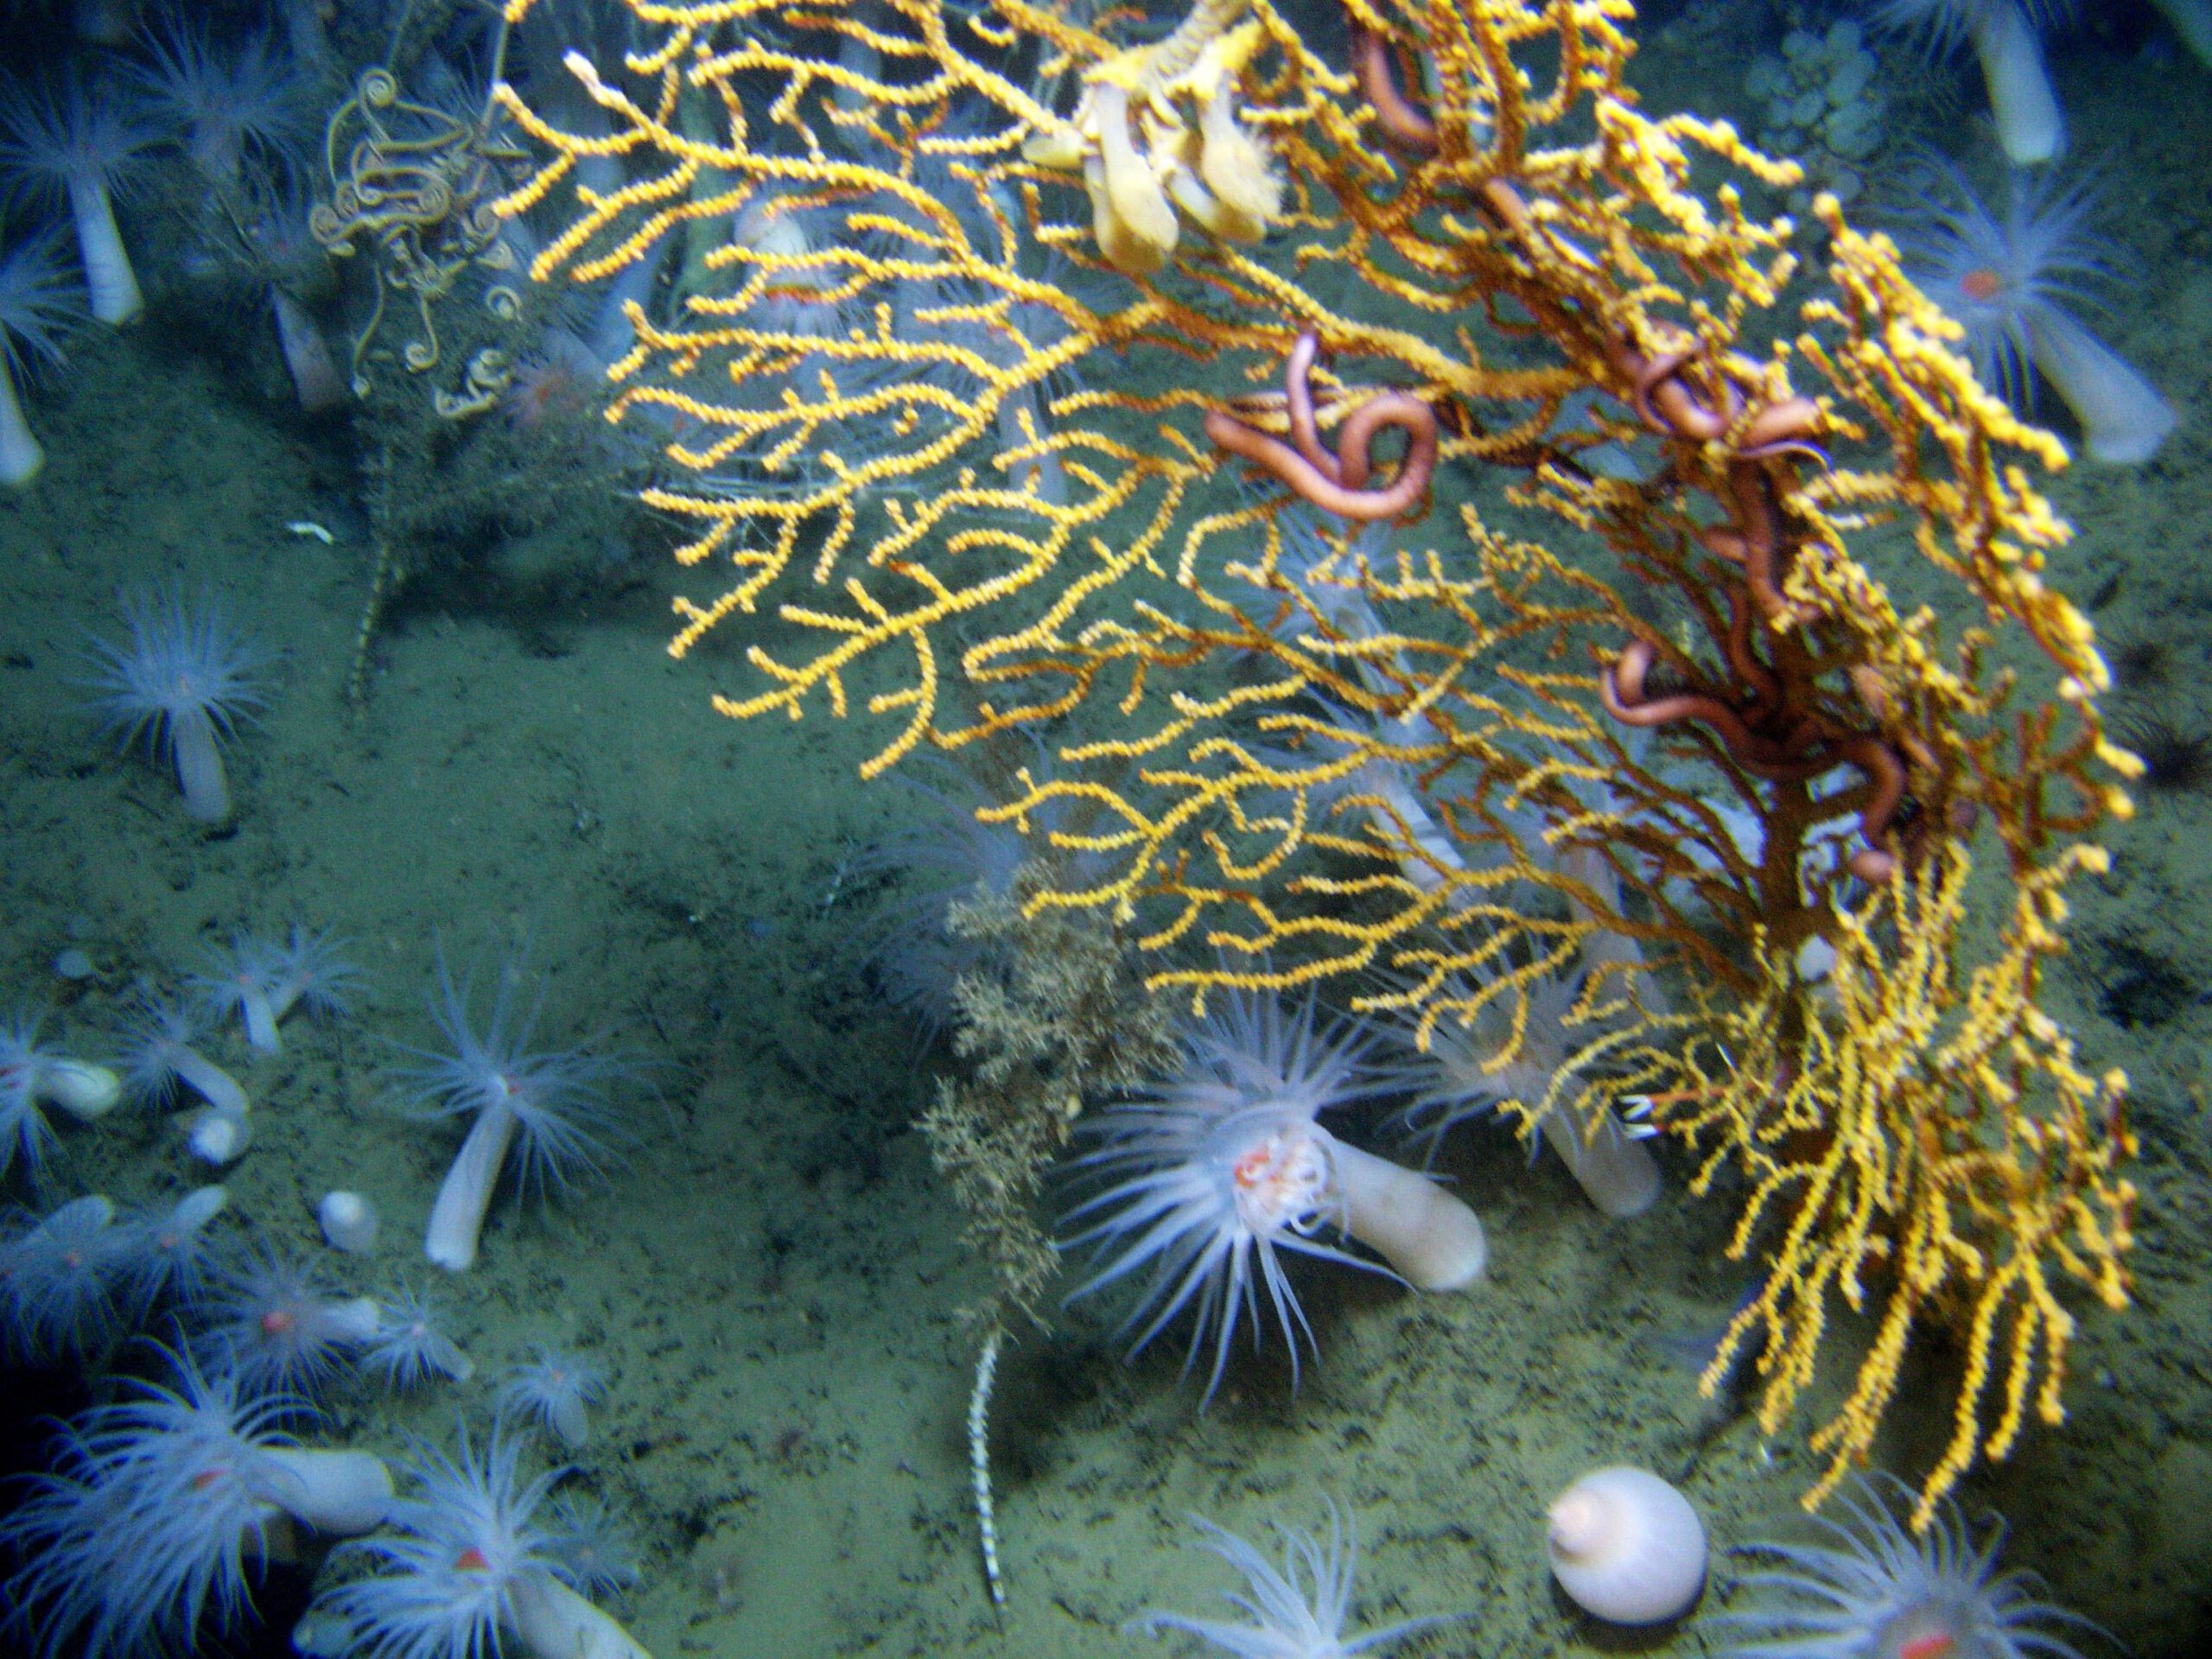 A large bright yellow coral with anemones around, with worm-like creatures trapped inside it